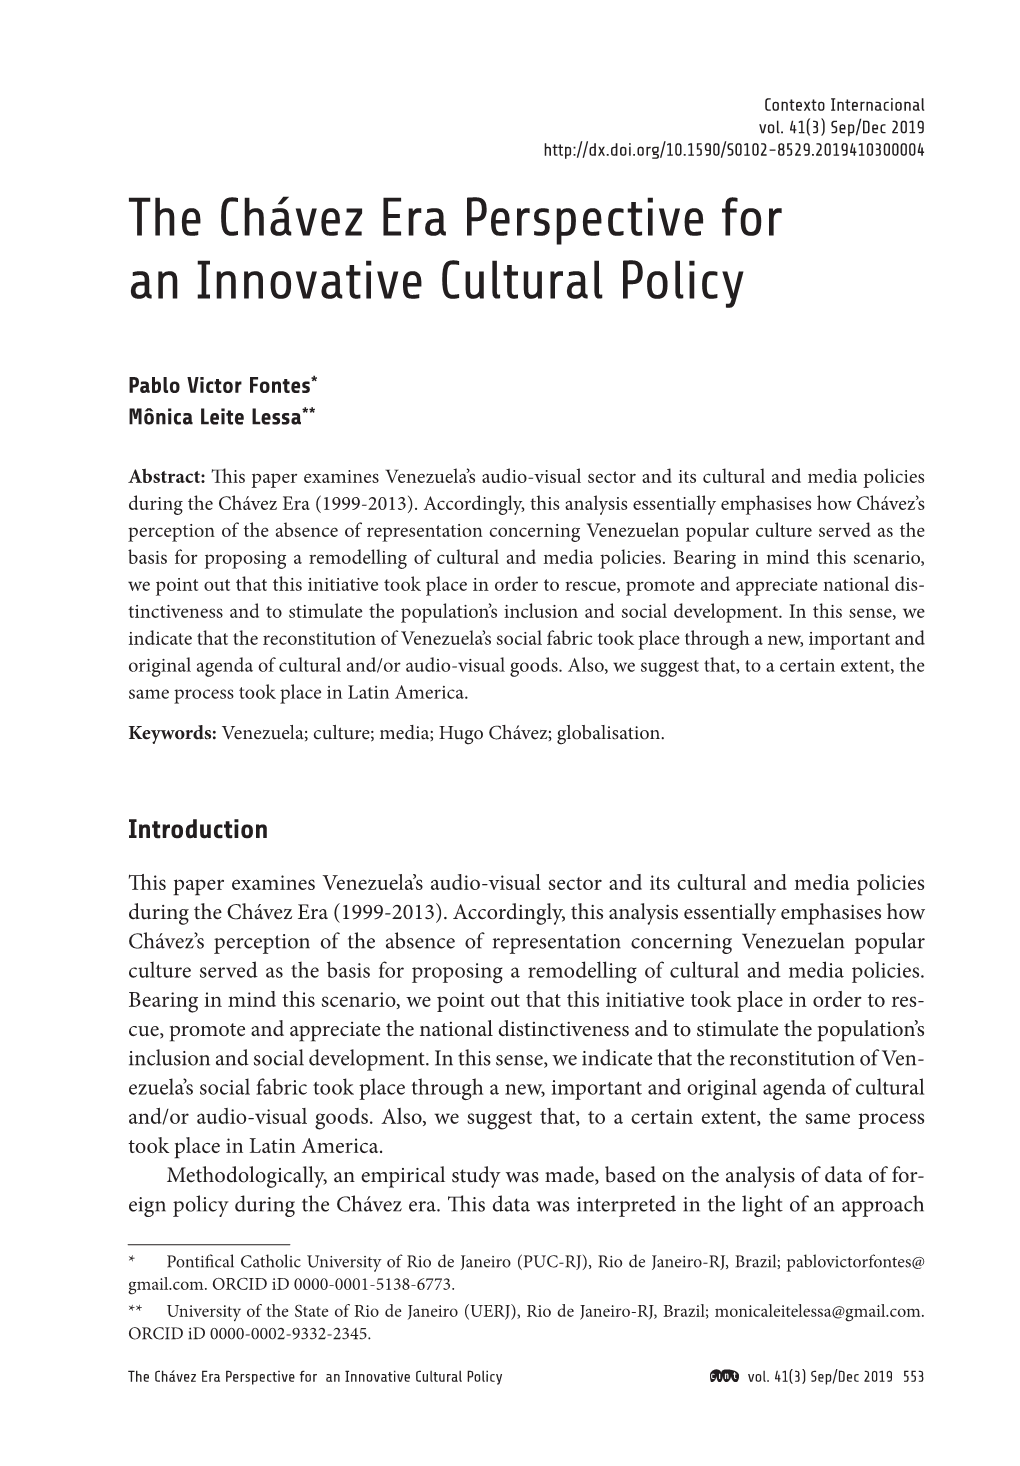 The Chávez Era Perspective for an Innovative Cultural Policy Fontes & Lessa